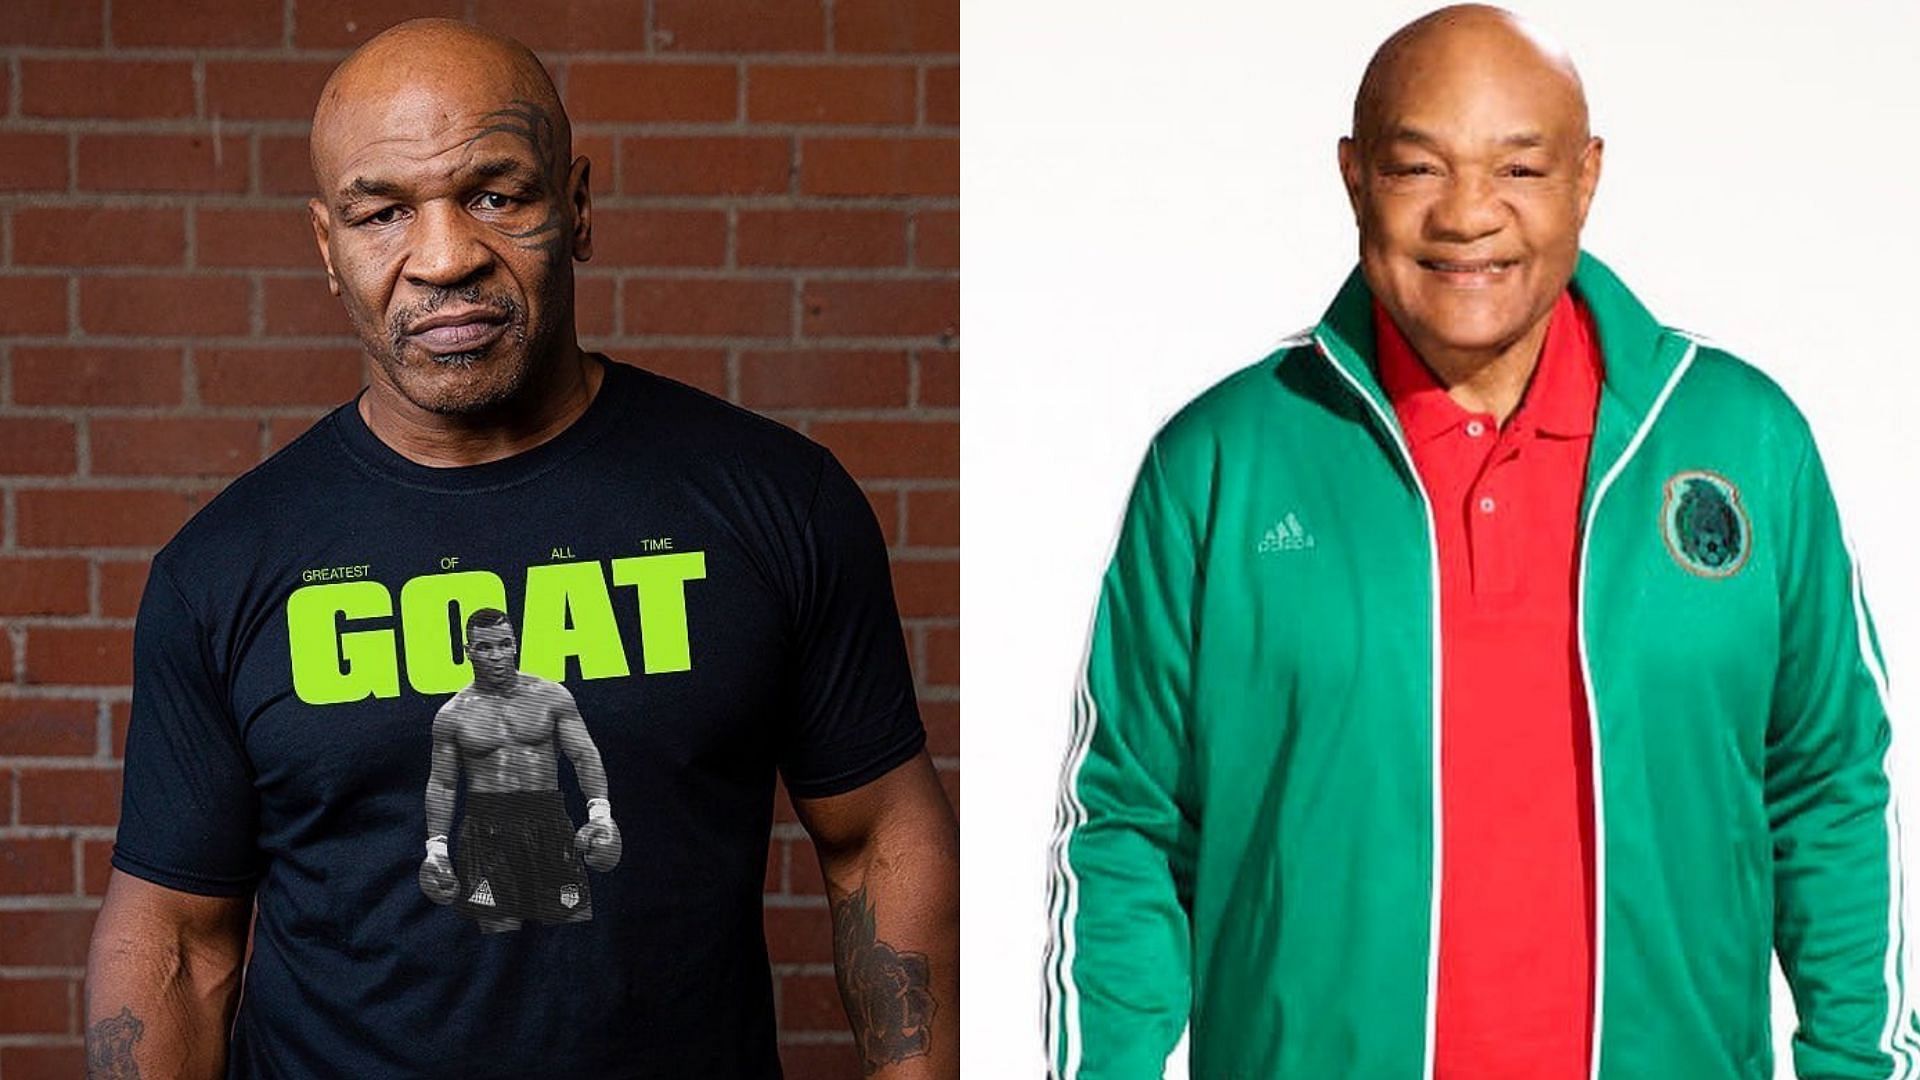 Mike Tyson (left) and George Foreman (right) [Image Credits: @miketyson and @biggeorgeforeman via Instagram]